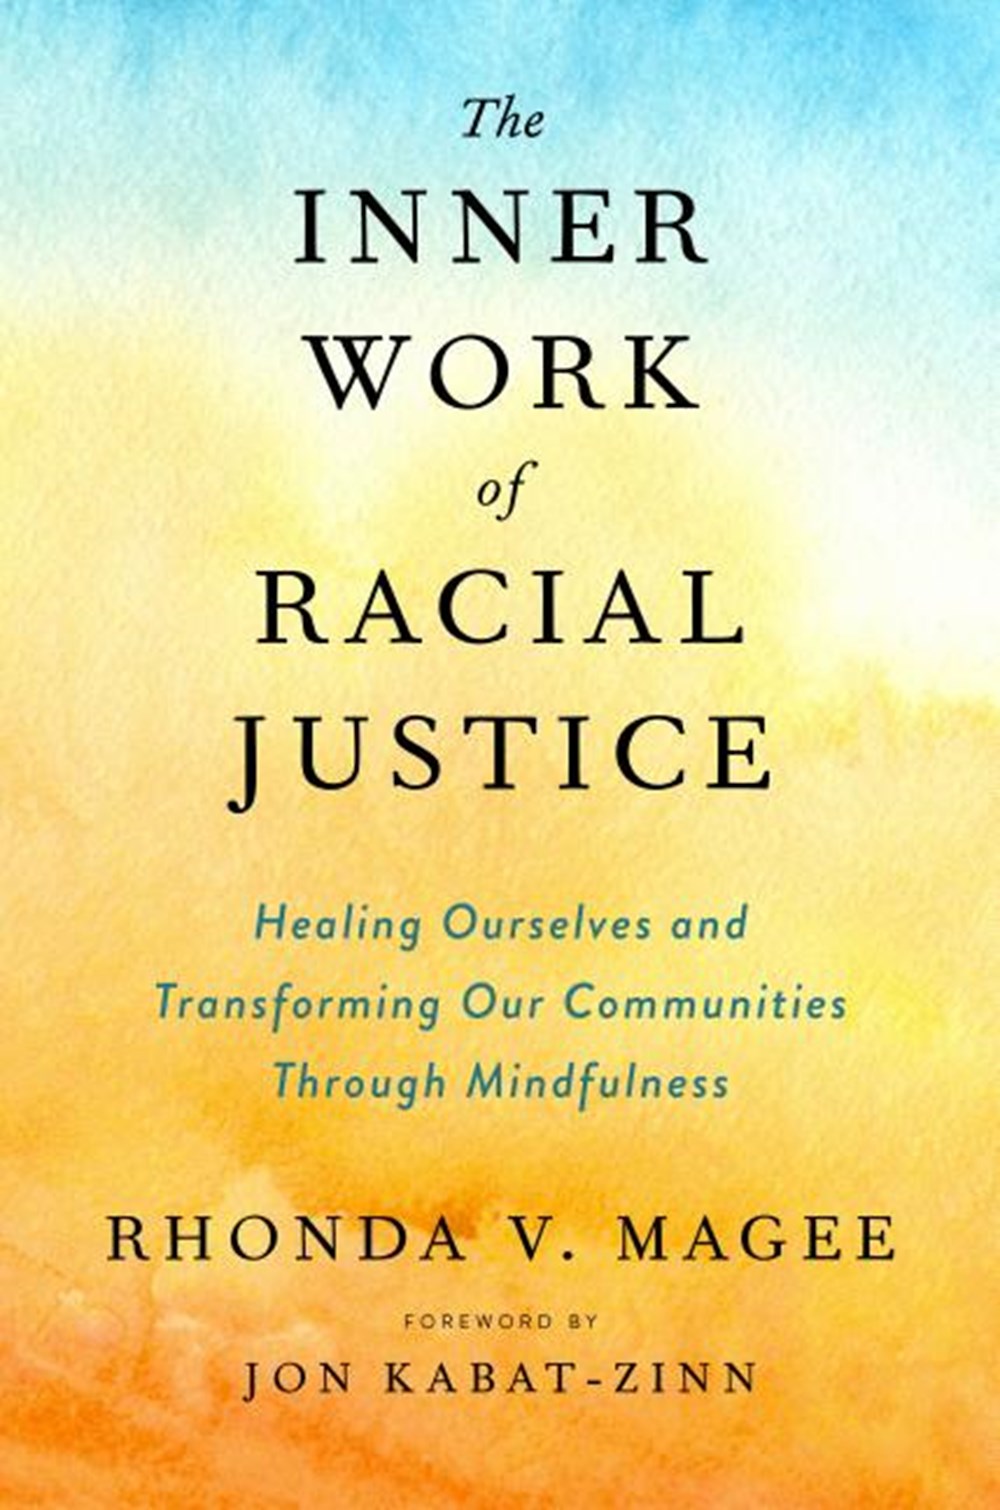 Inner Work of Racial Justice Healing Ourselves and Transforming Our Communities Through Mindfulness